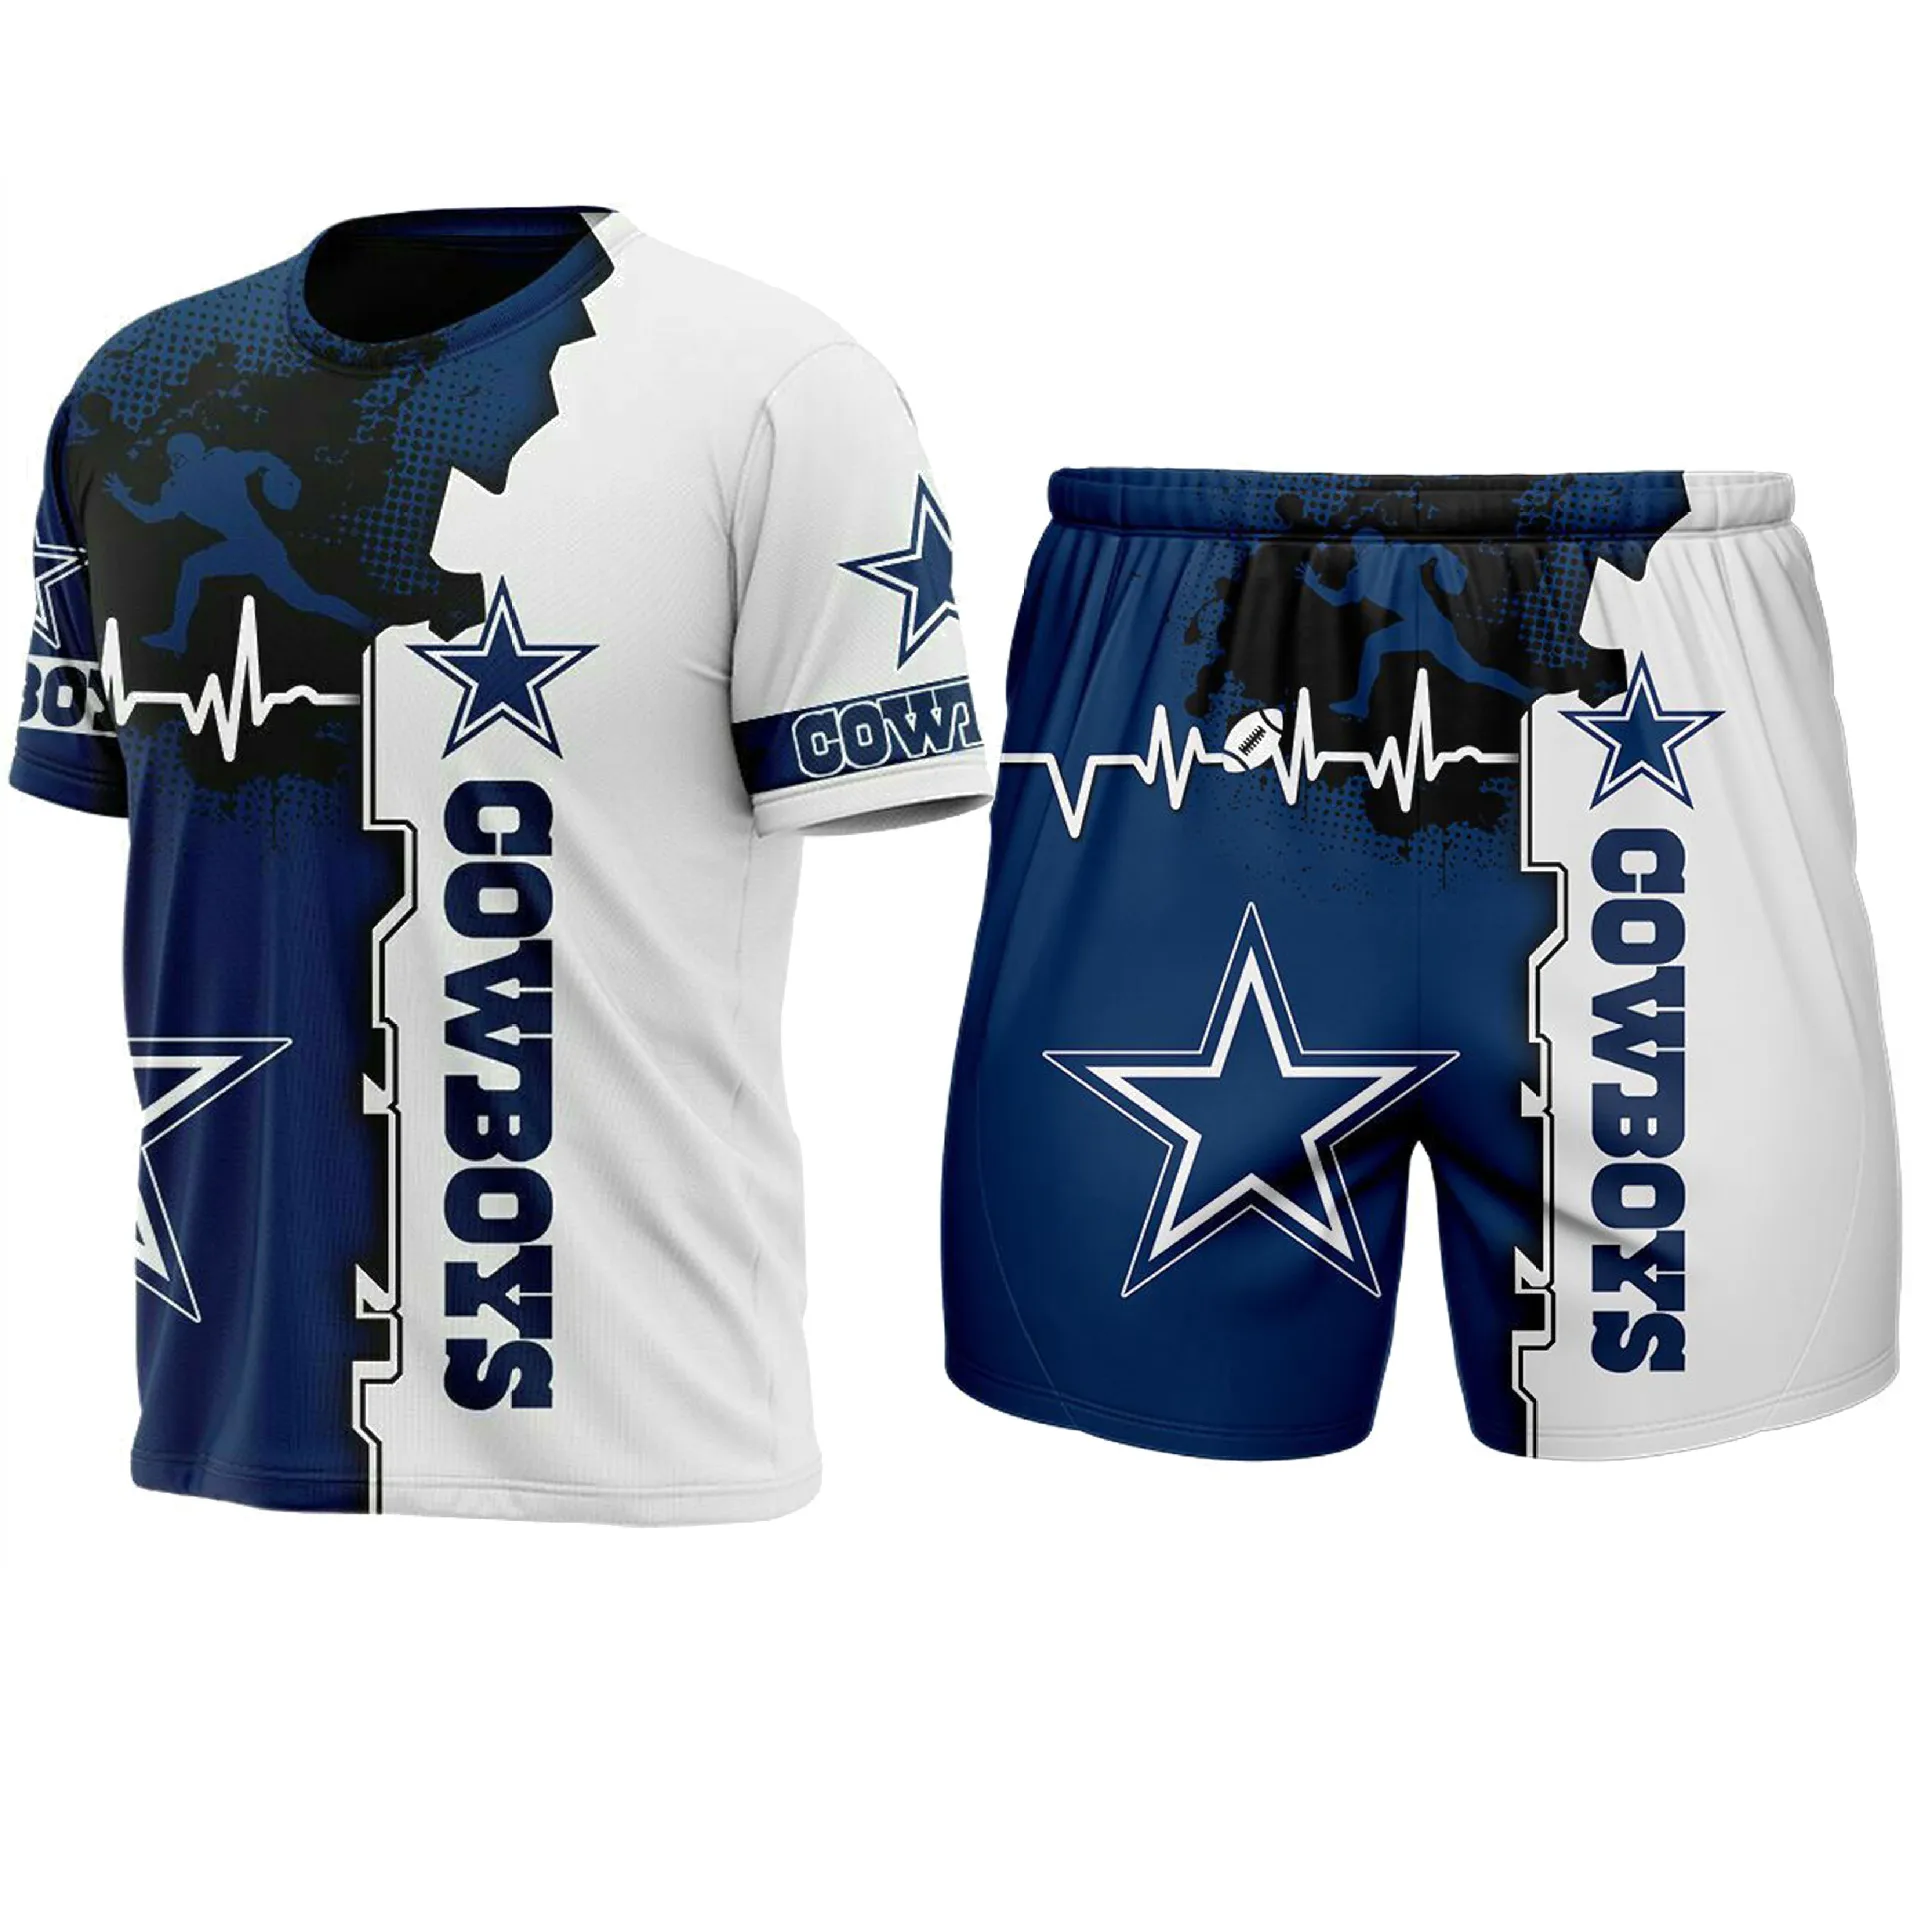 

2022 USA Plus size NFL sport T-shirts short sleeves 32 teams american football wear Sets, Mix color